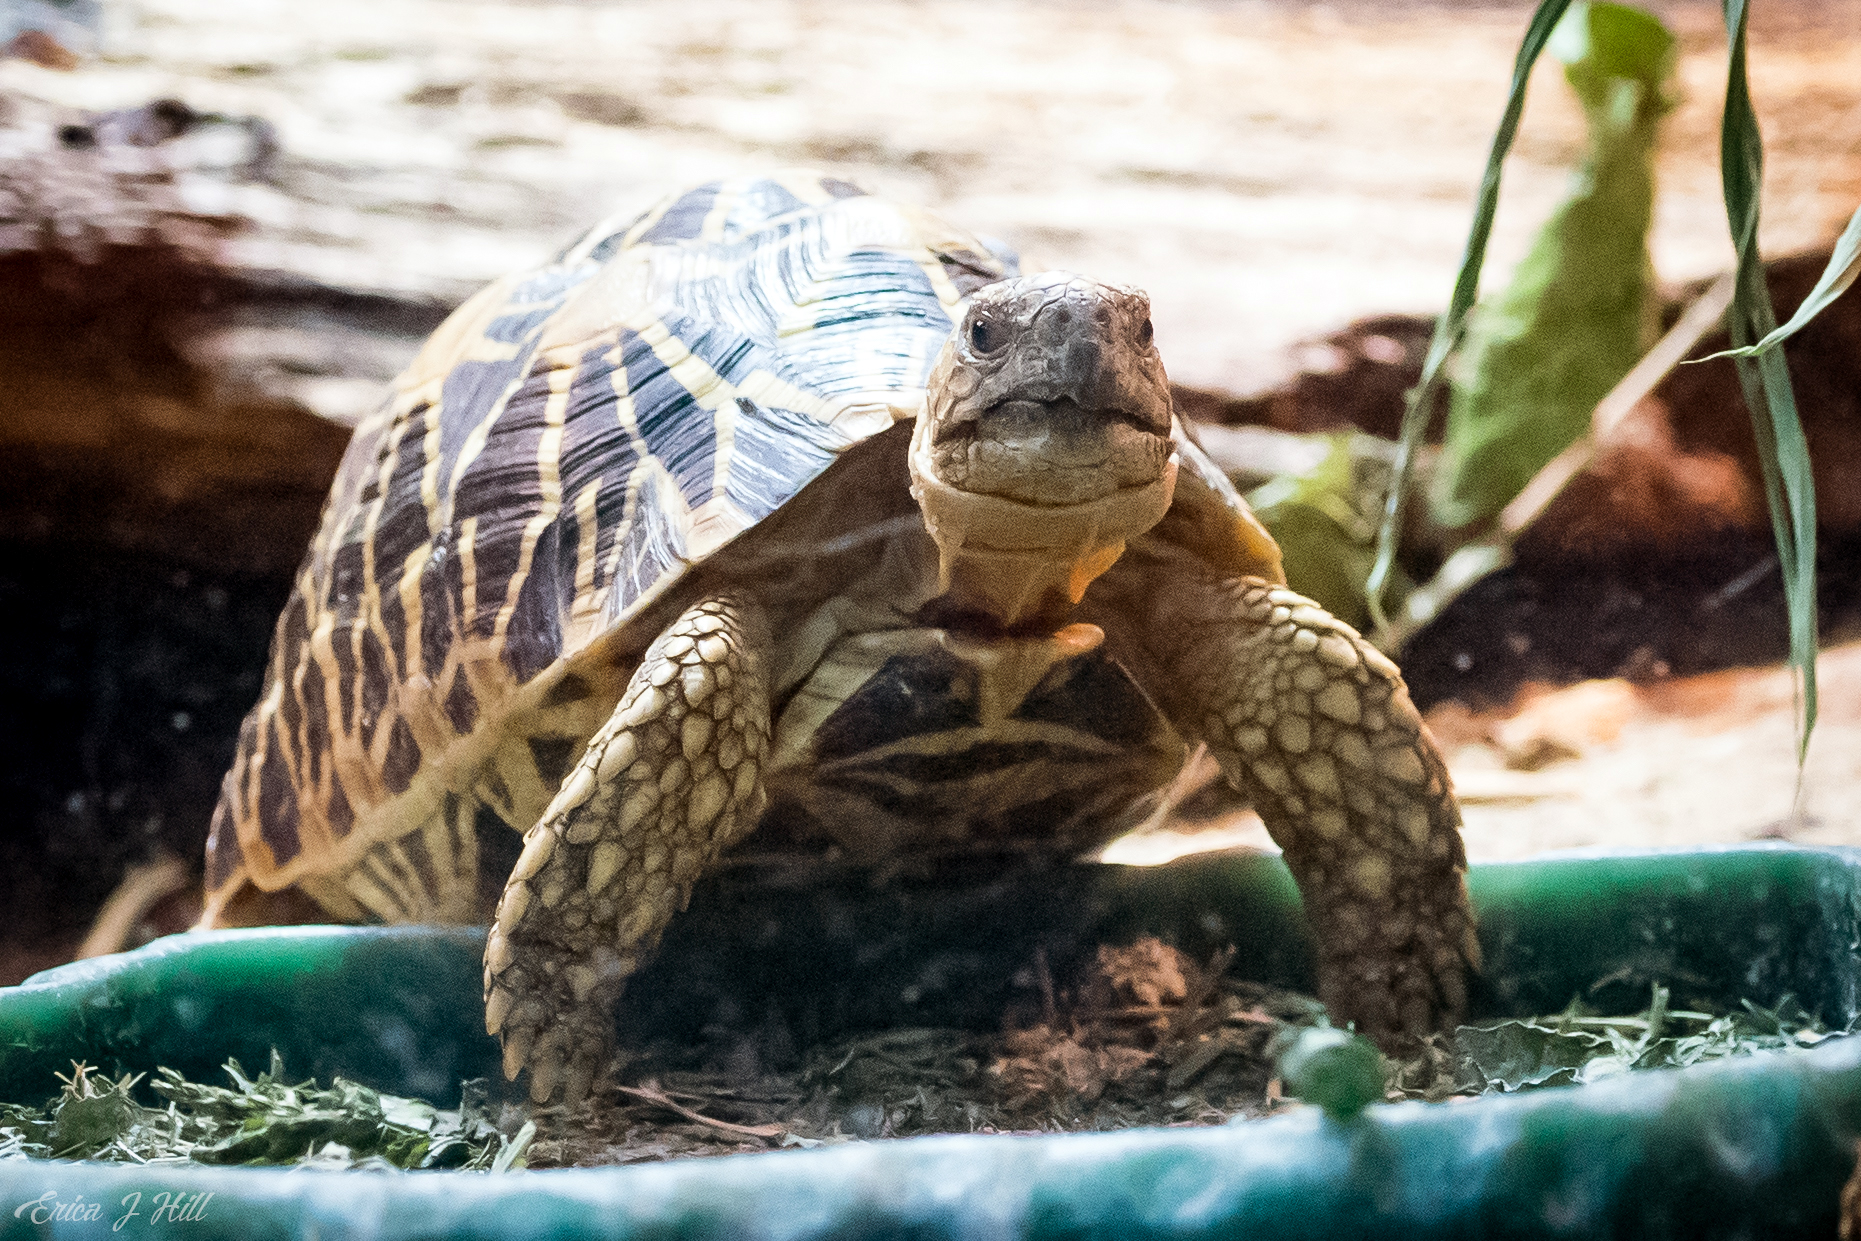 Indian Star Turtle perched on food bowl in habitat